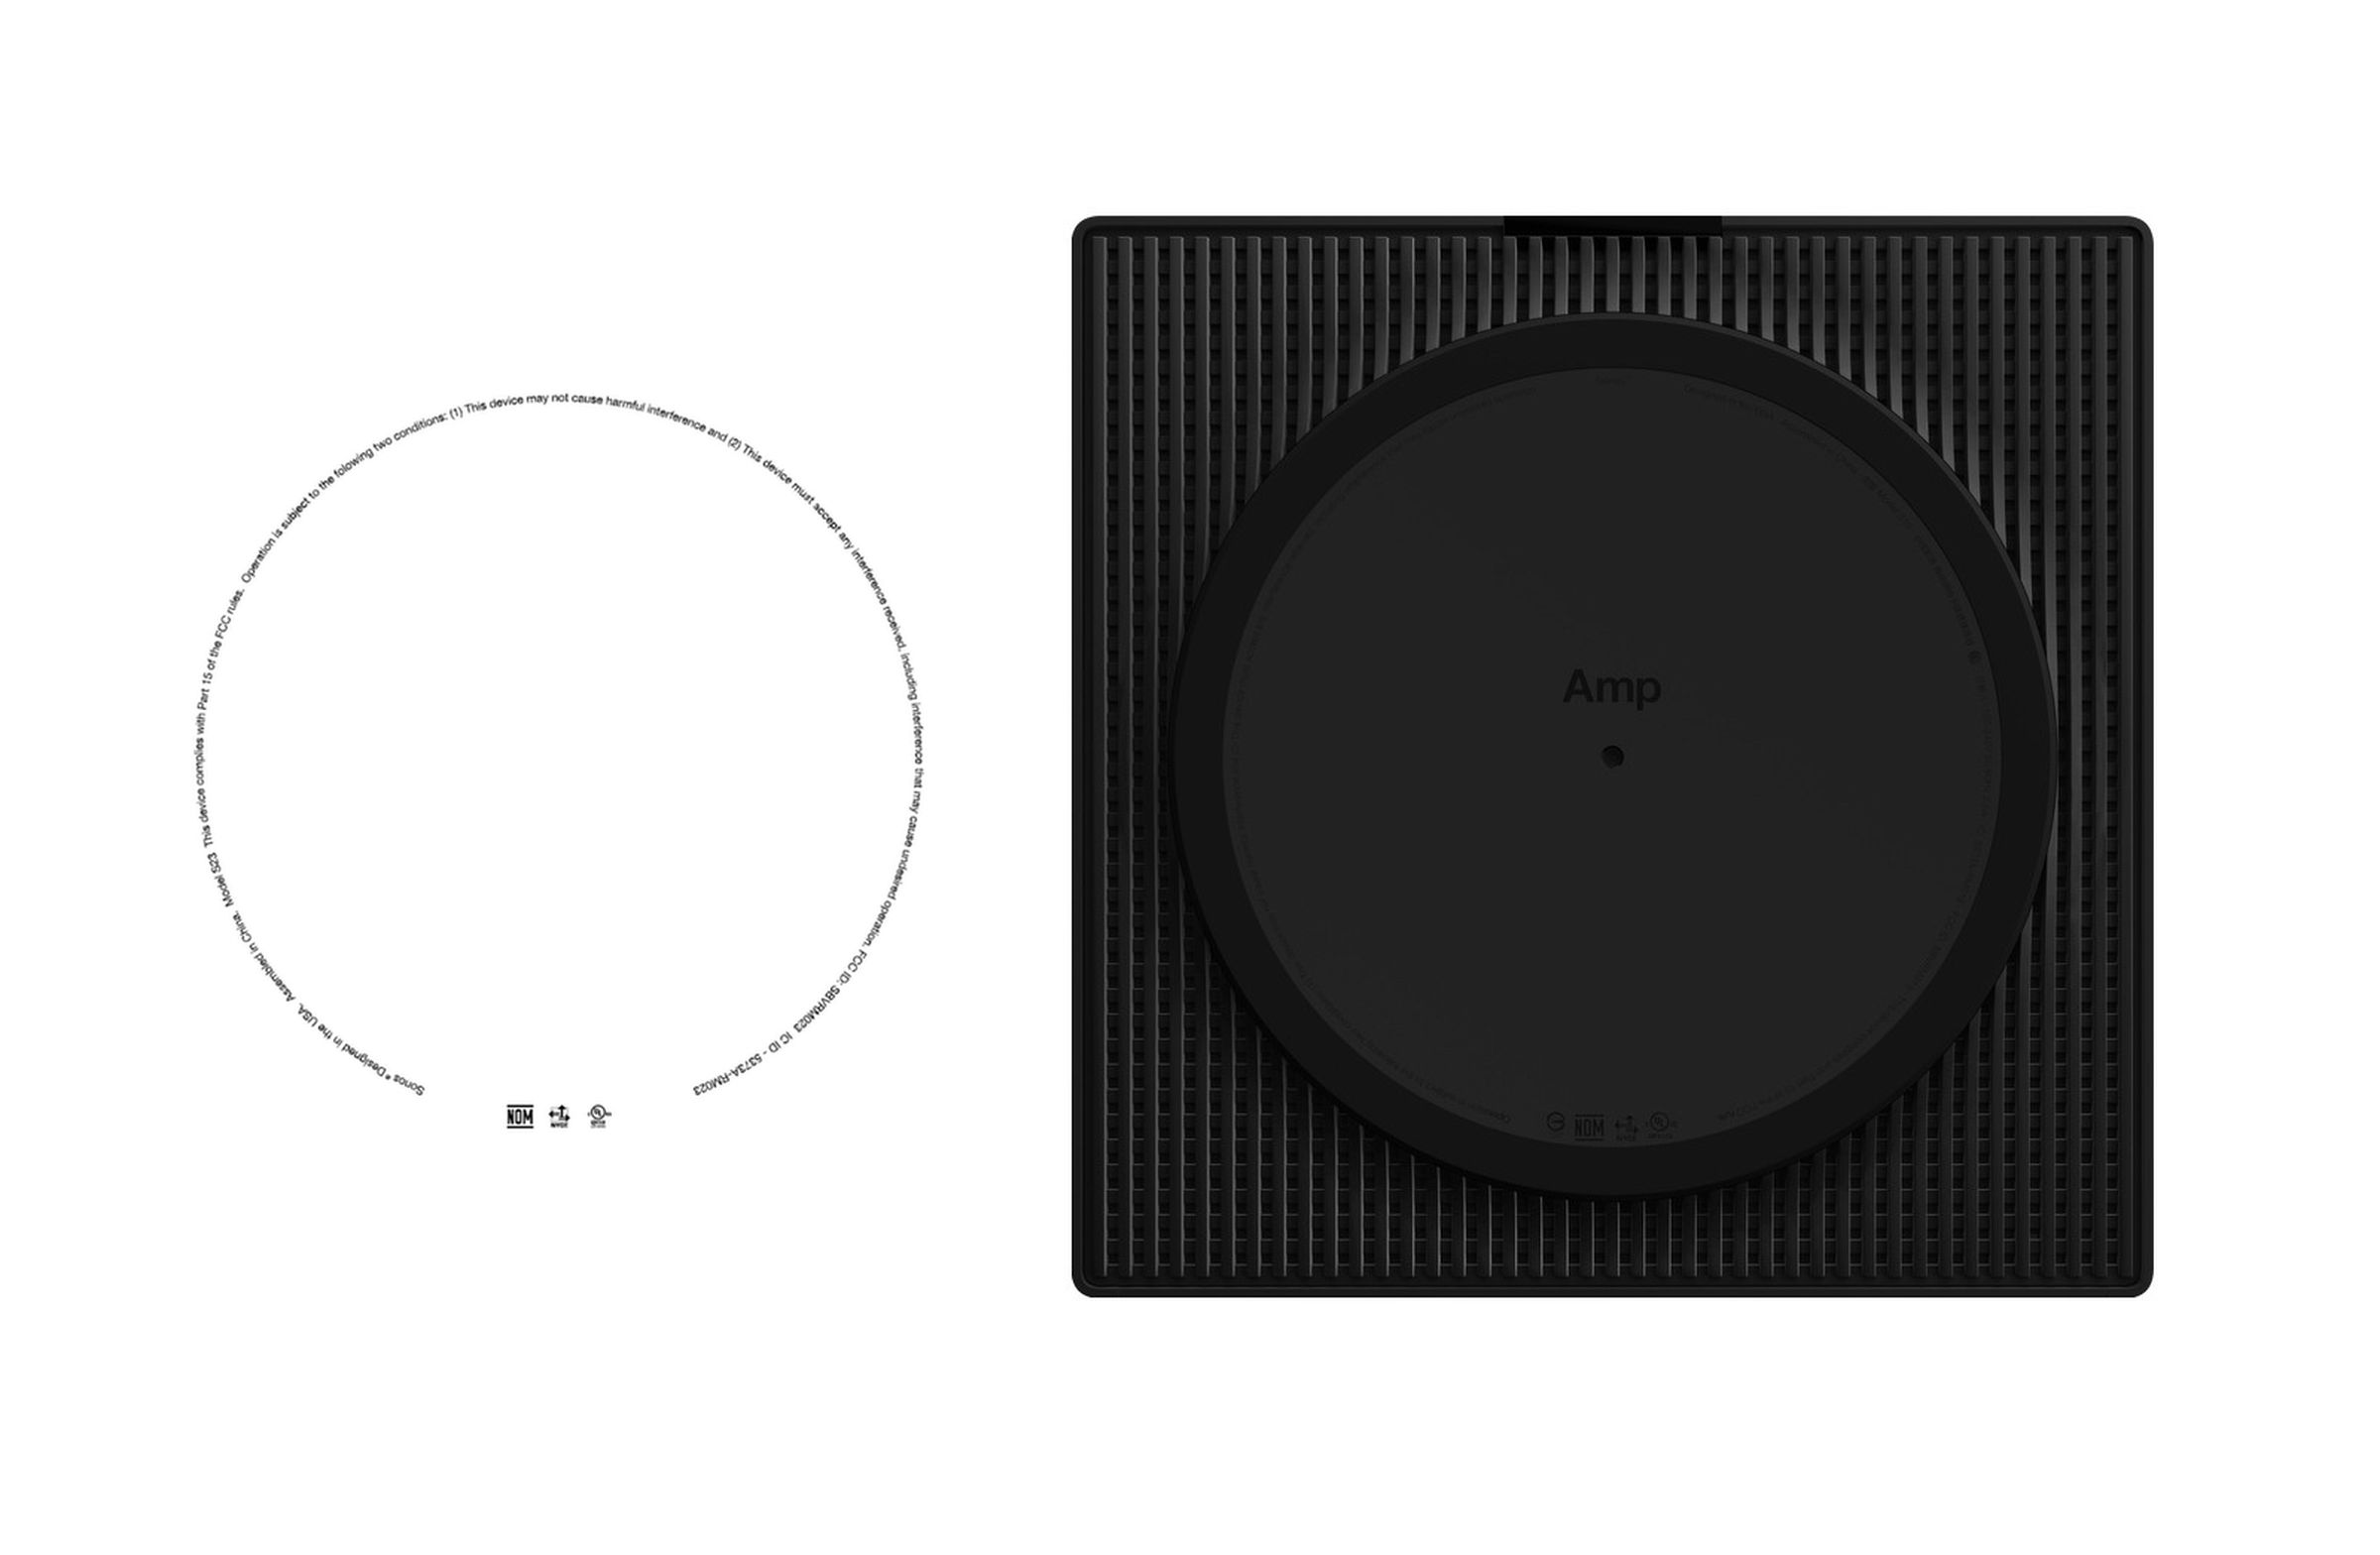 New Sonos device model S23 at left, Sonos Amp at right.